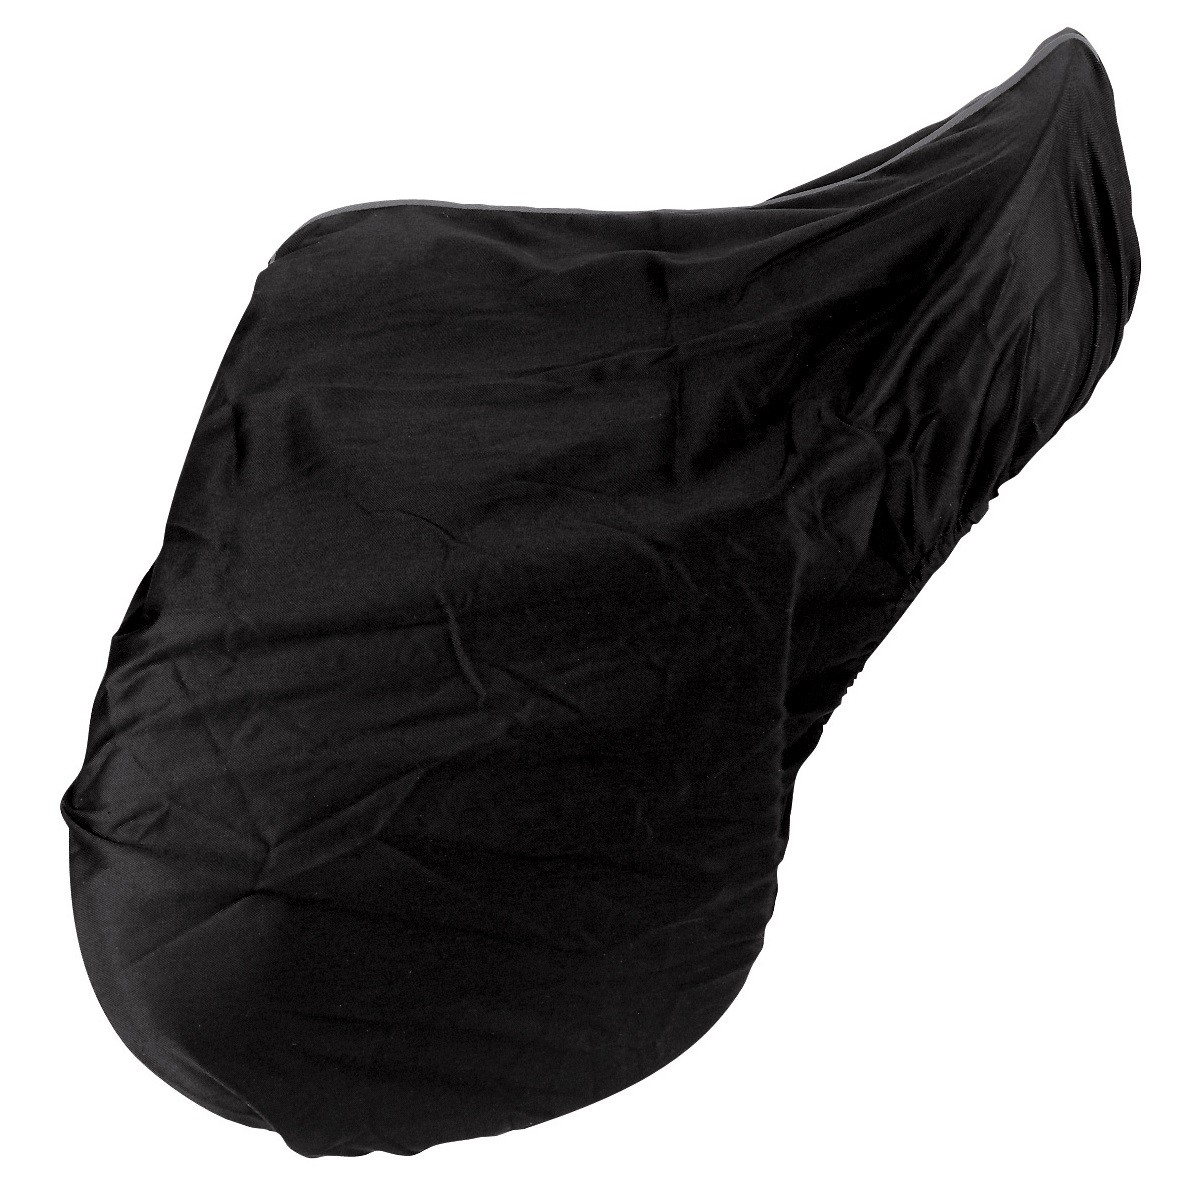 Saddle cover full, made of cotton P